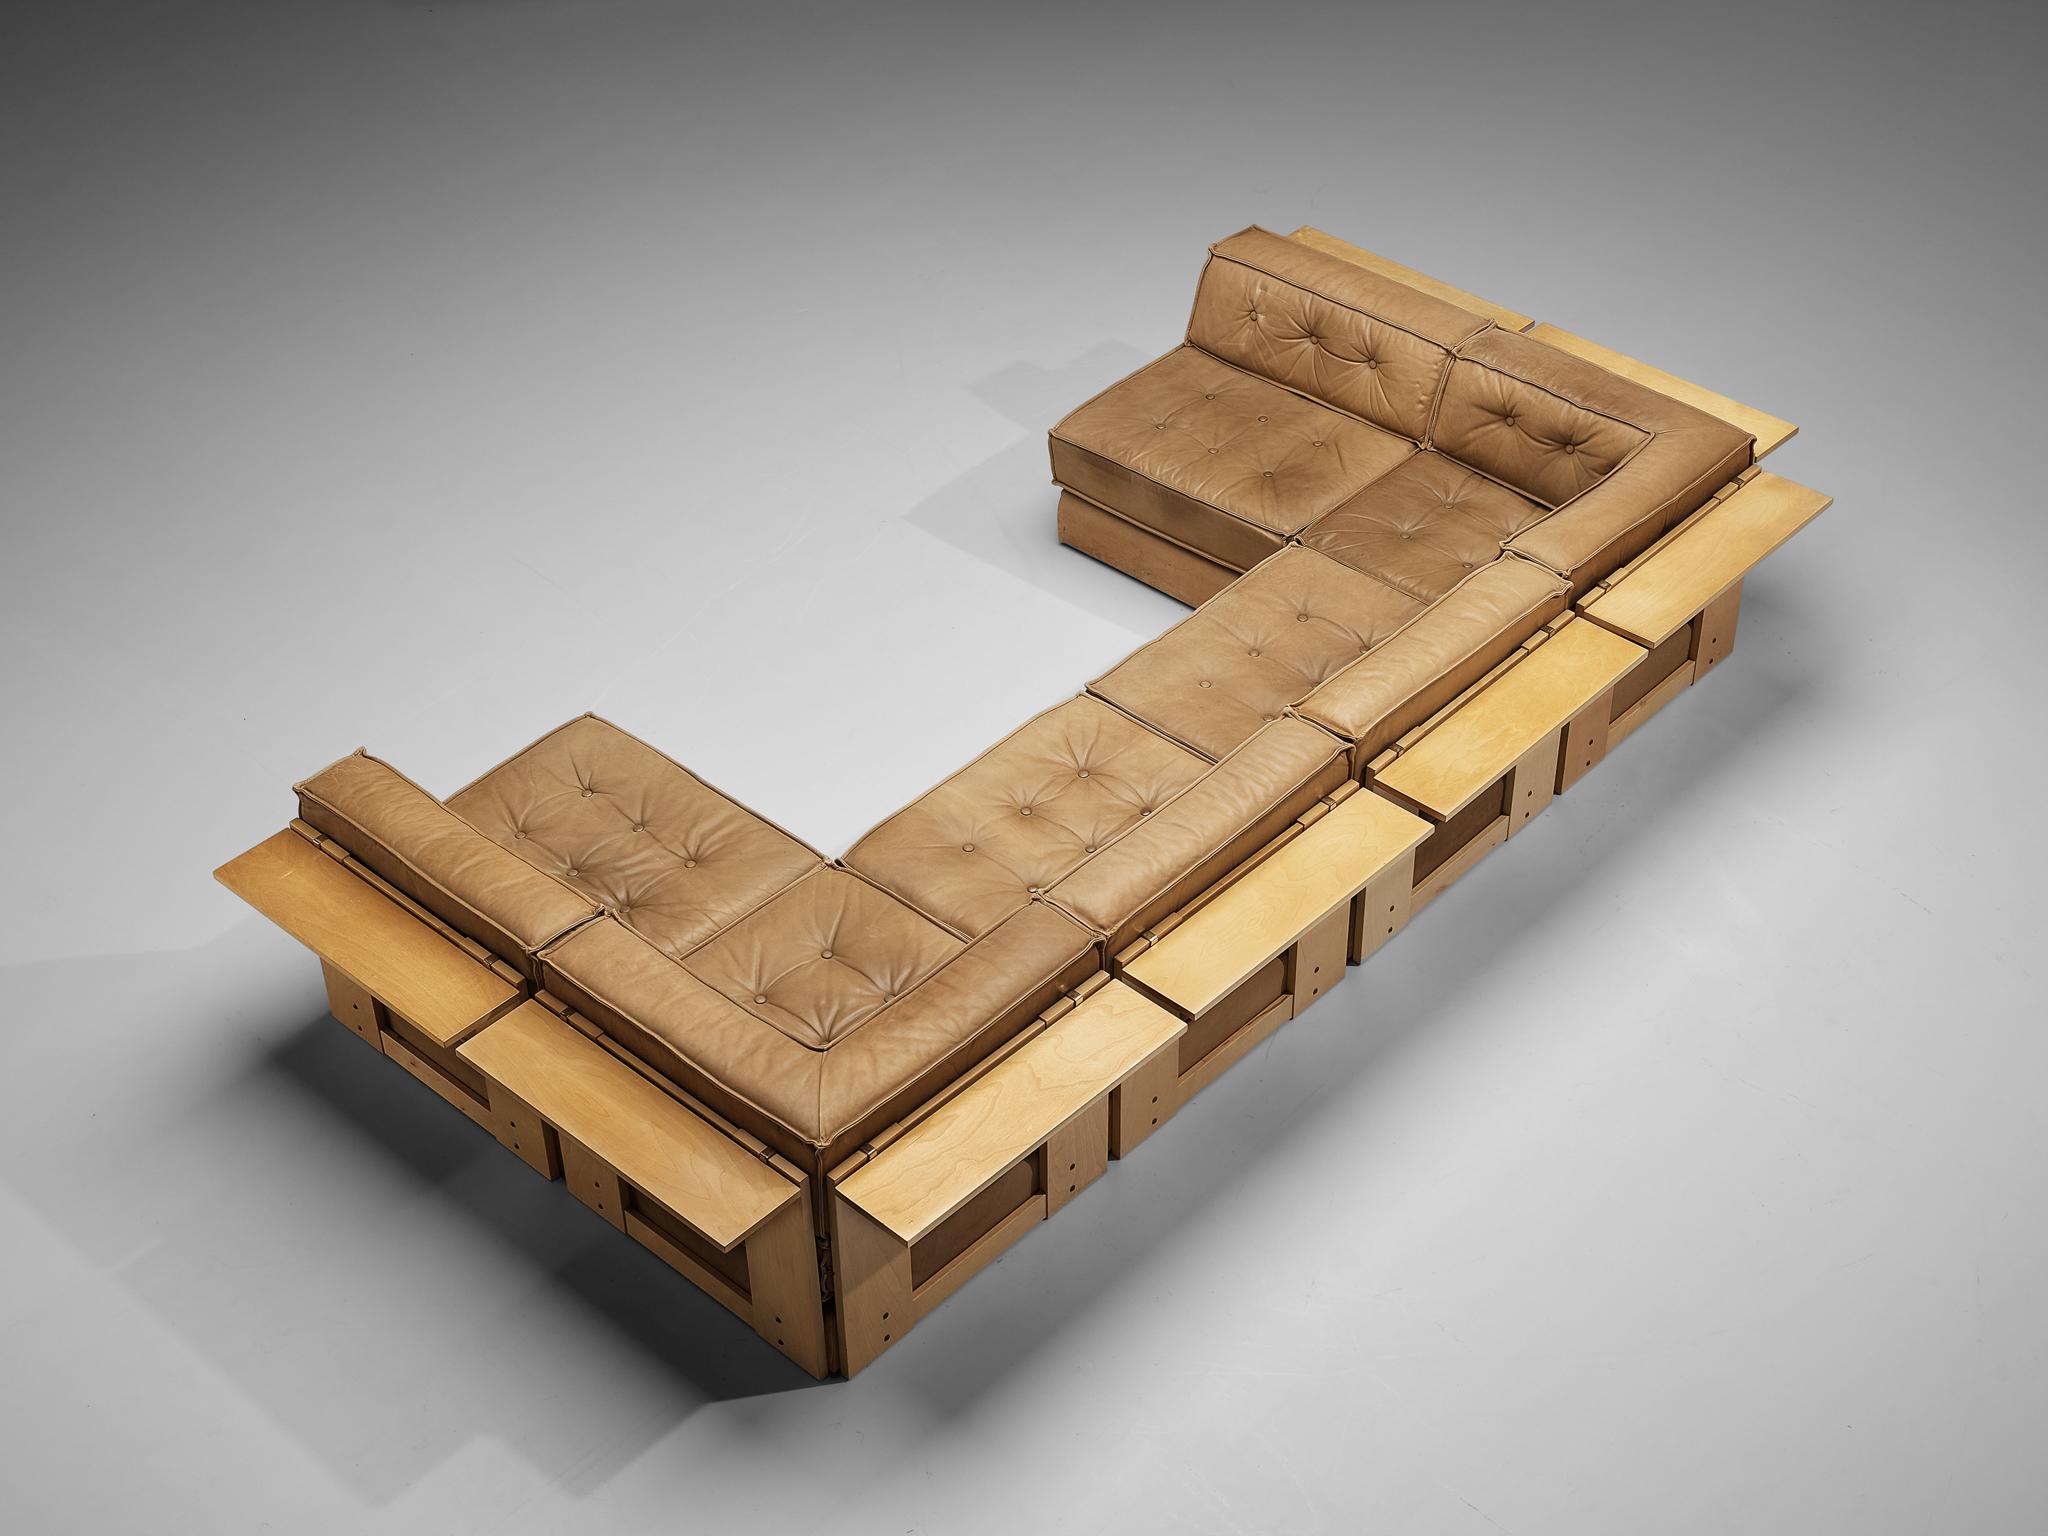 Asko, sectional sofa, leather, birch, brass, Finland, 1960s

This high-quality sectional sofa is produced by Asko and contains four regular elements and two corner elements, making it possible to arrange this sofa to your own wishes. The design is